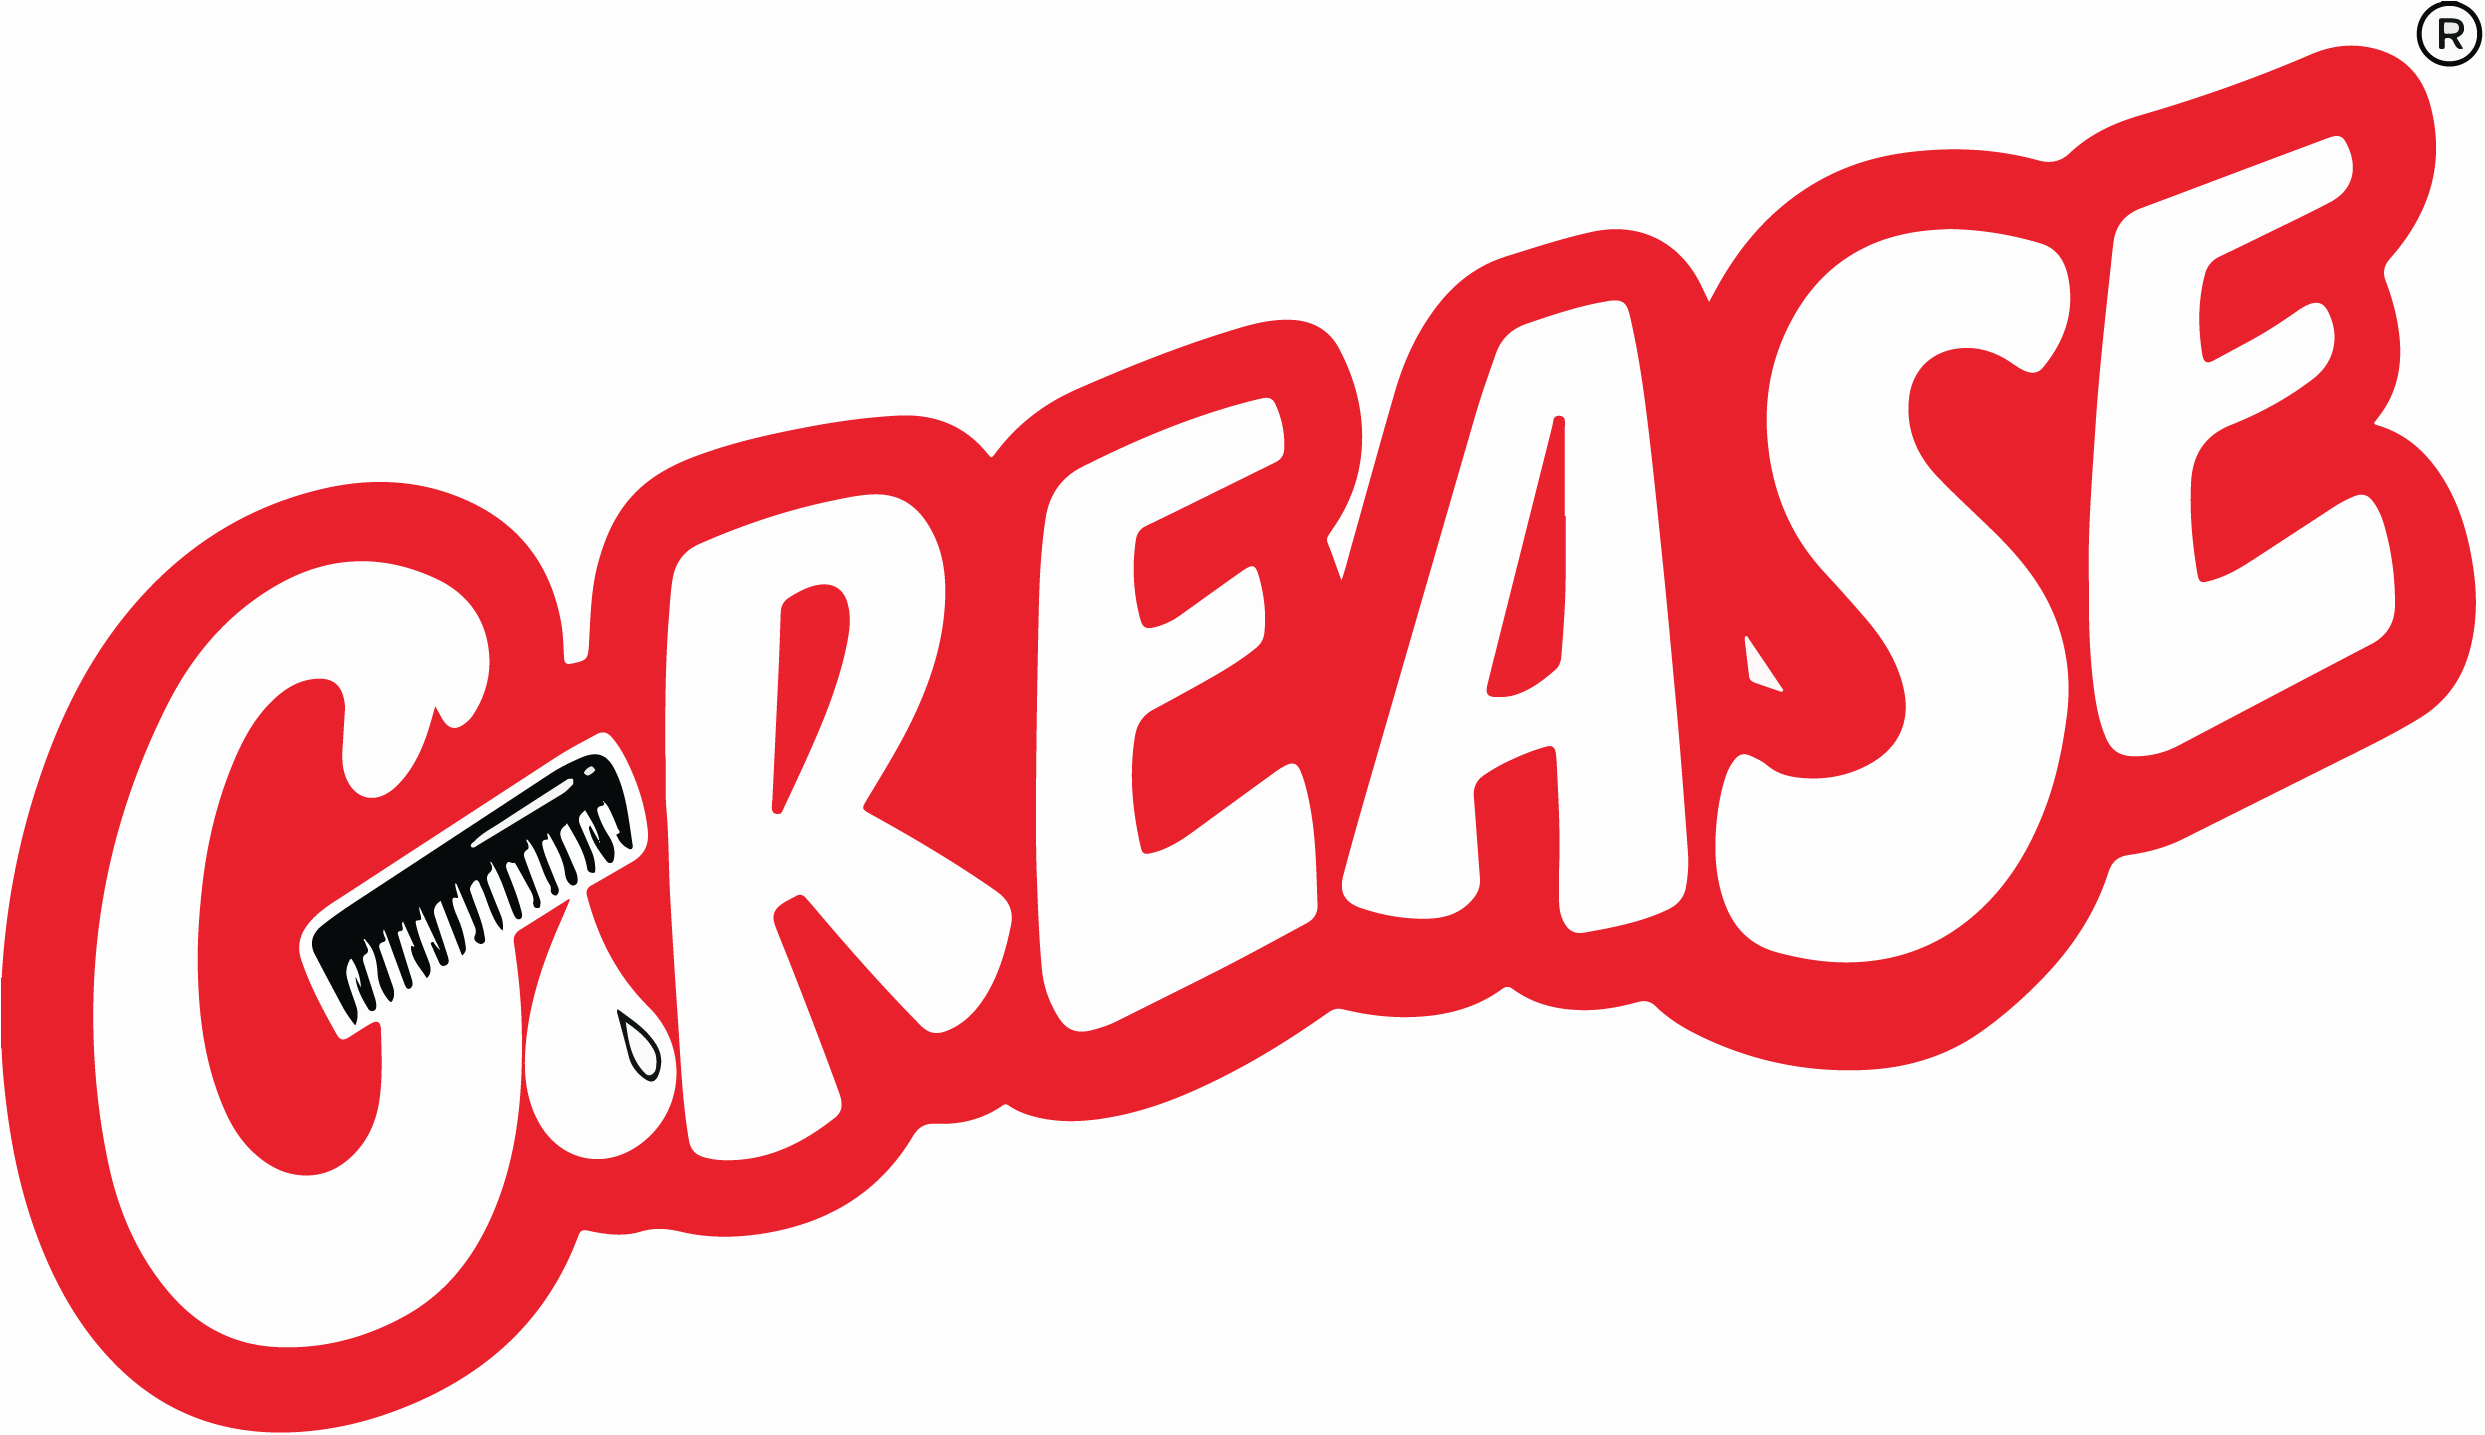 Grease the musical